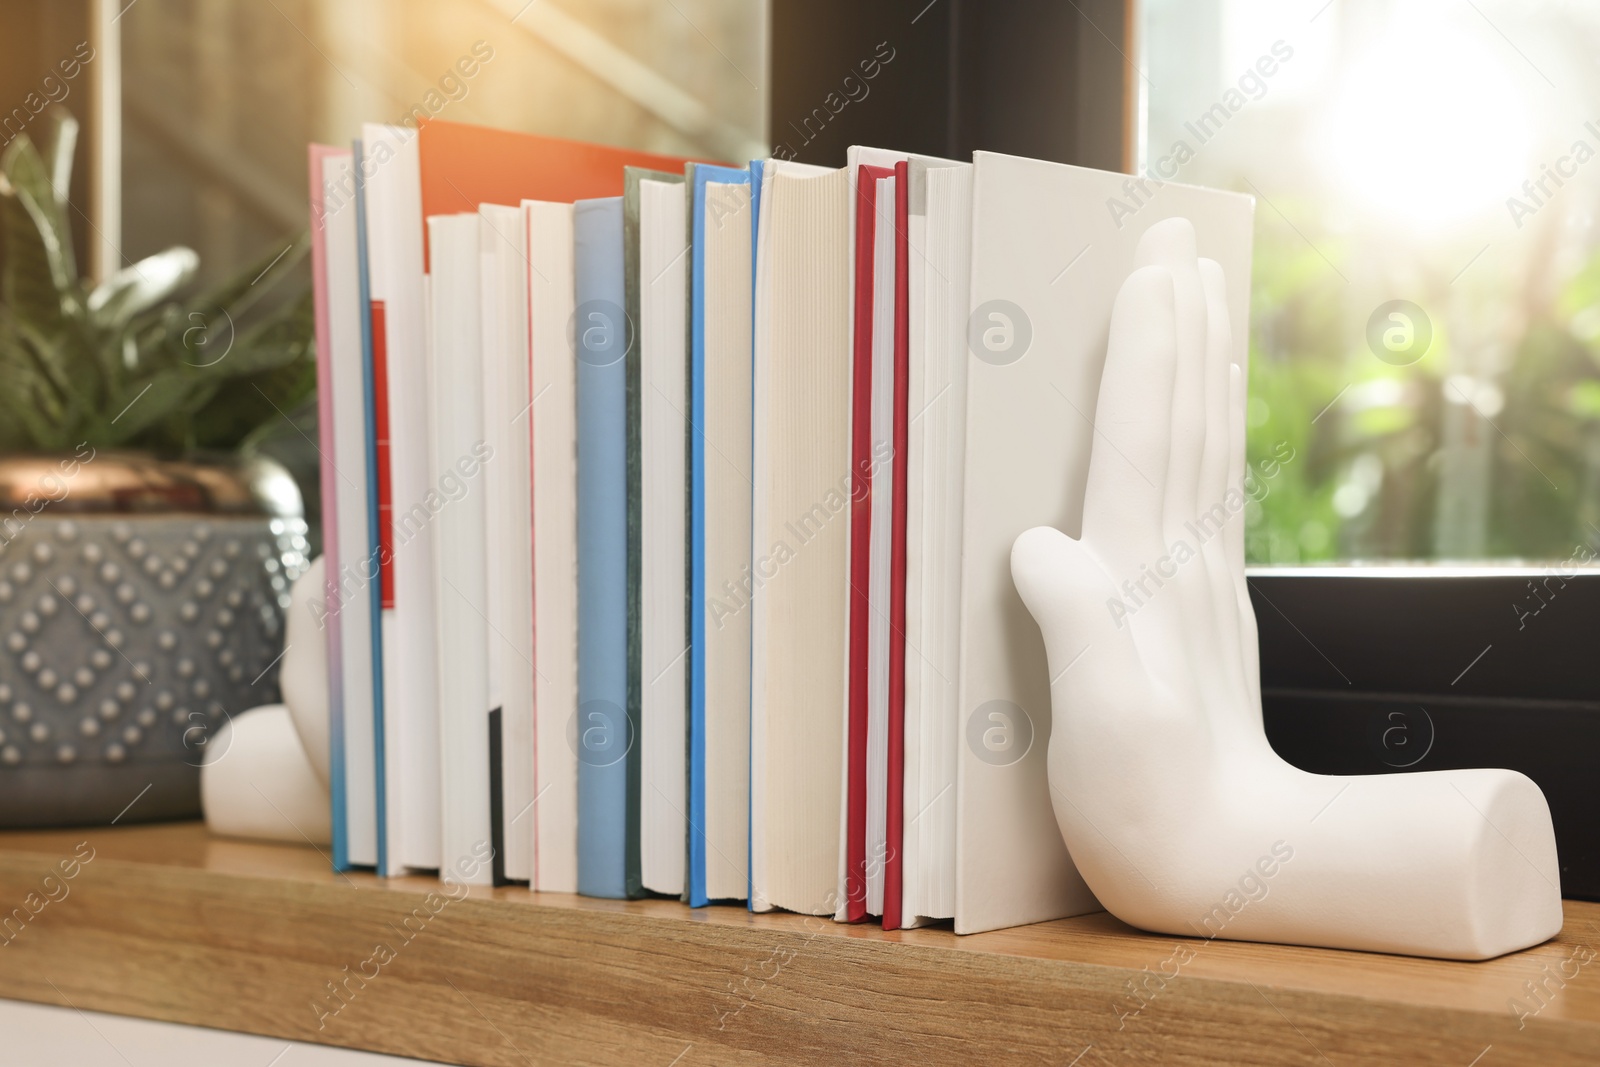 Photo of Beautiful hand shaped bookends with books on window sill indoors